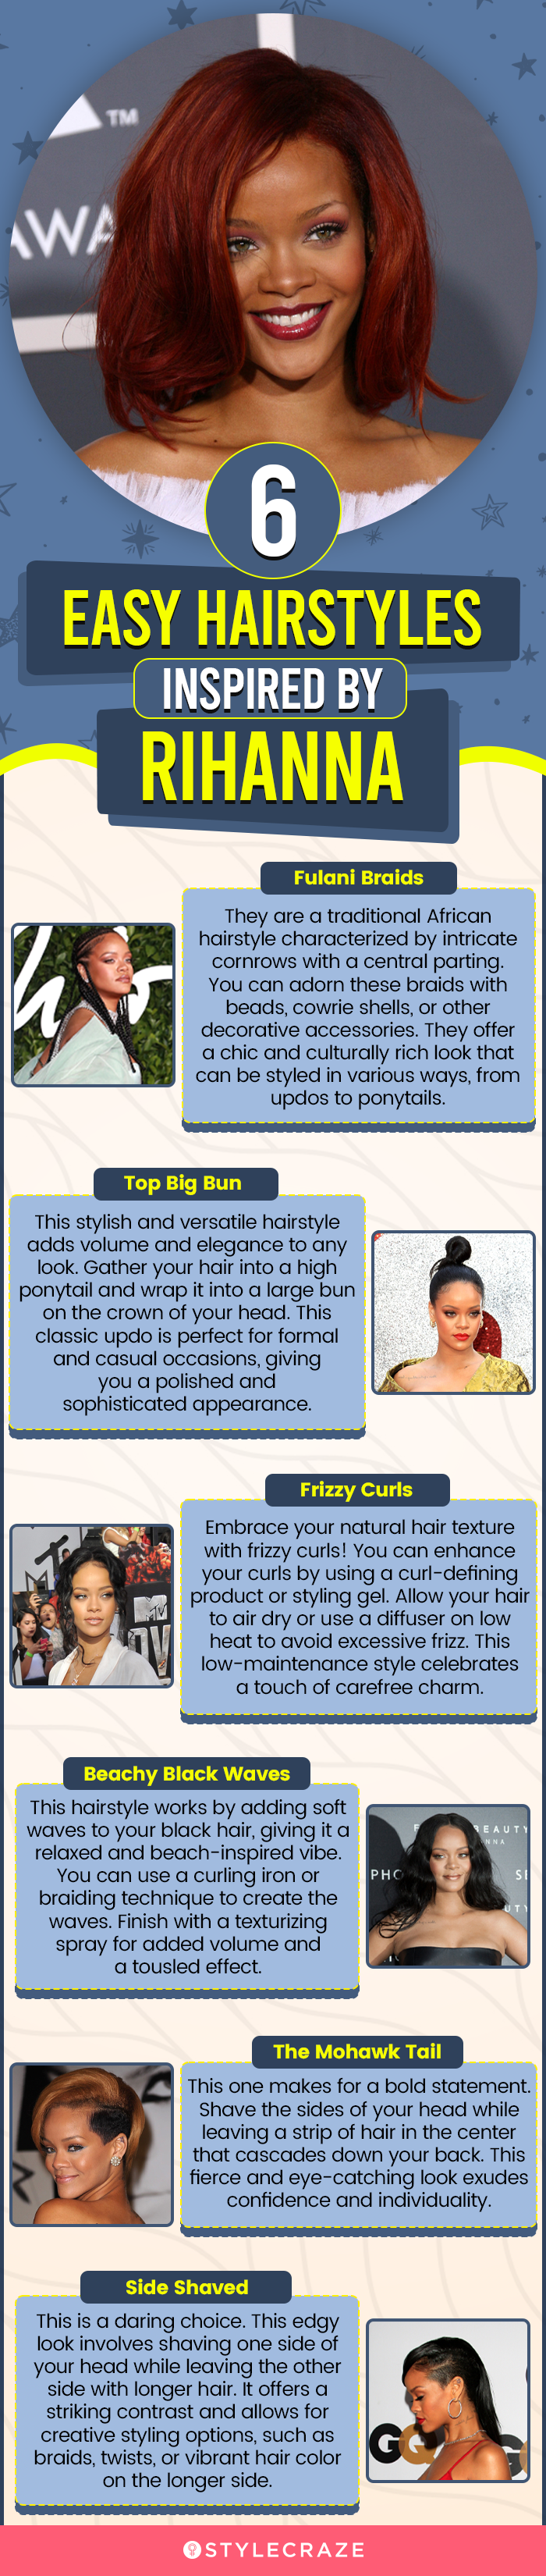 6 Easy Hairstyles Inspired By Rihanna (infographic)